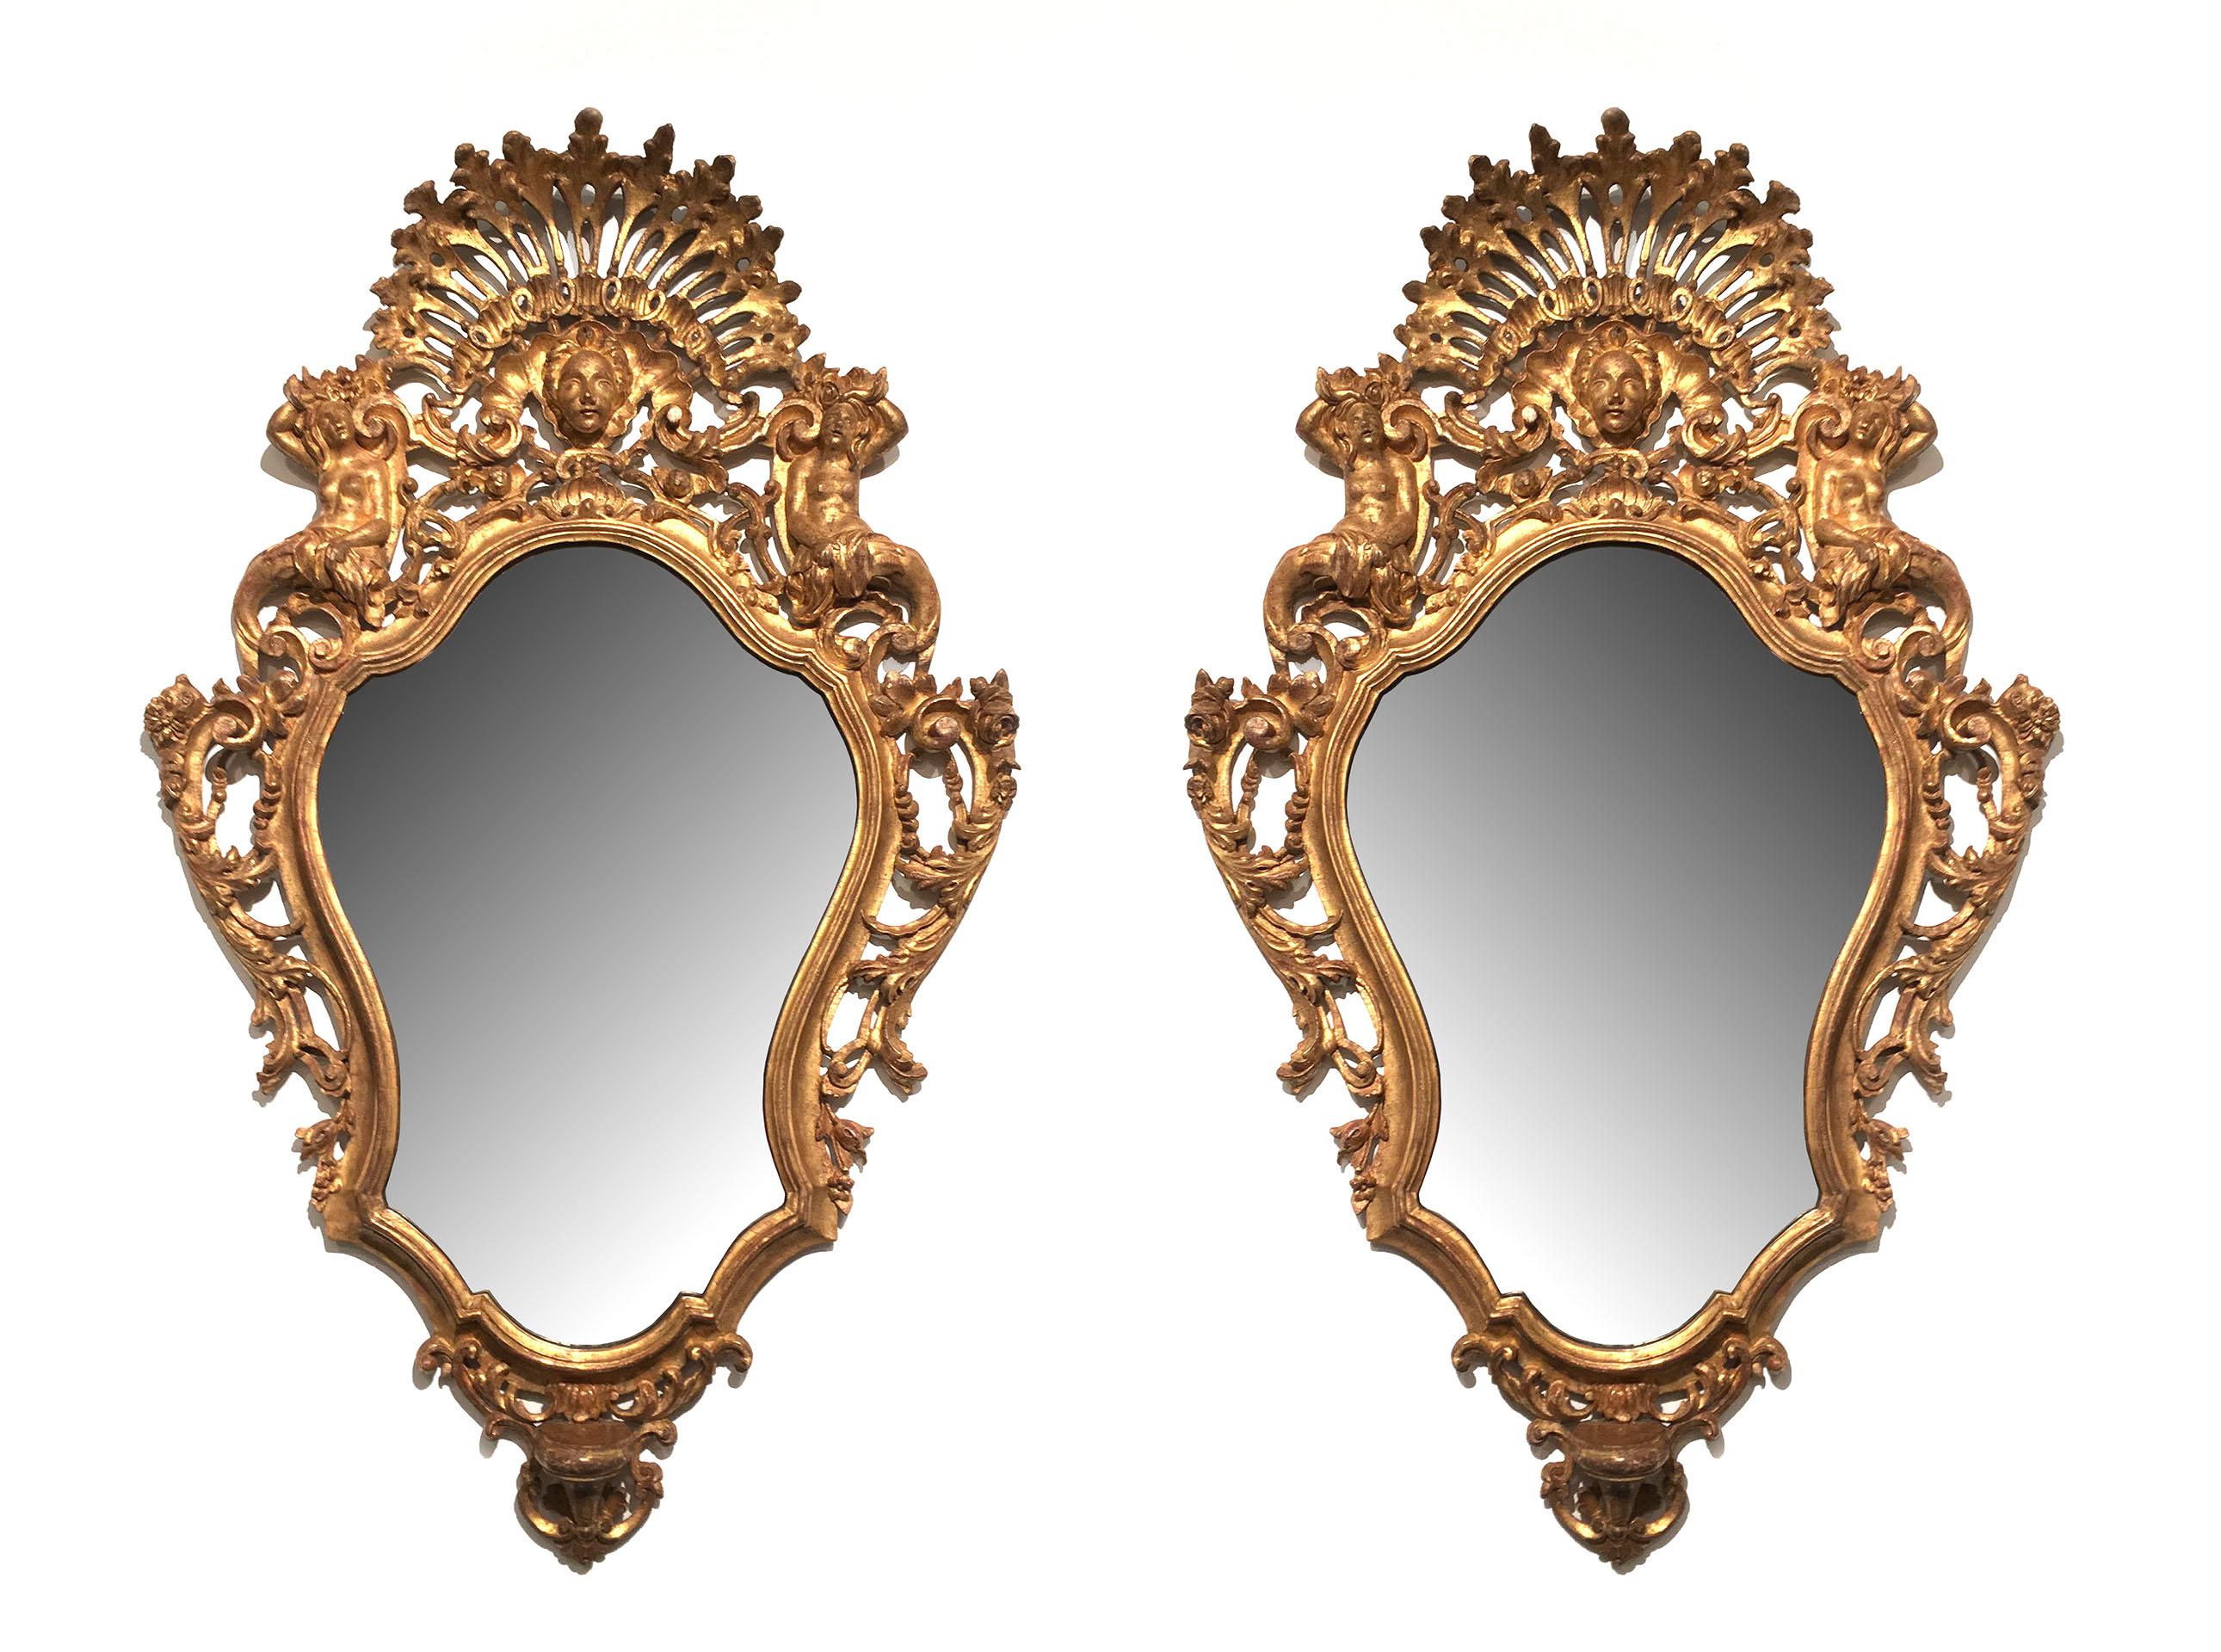 Italian Rococo (Florentine 19th century) pair of carved giltwood wall mirrors with a pierced fan shaped relief flanked by figures and a central head and all-over elaborately carved.